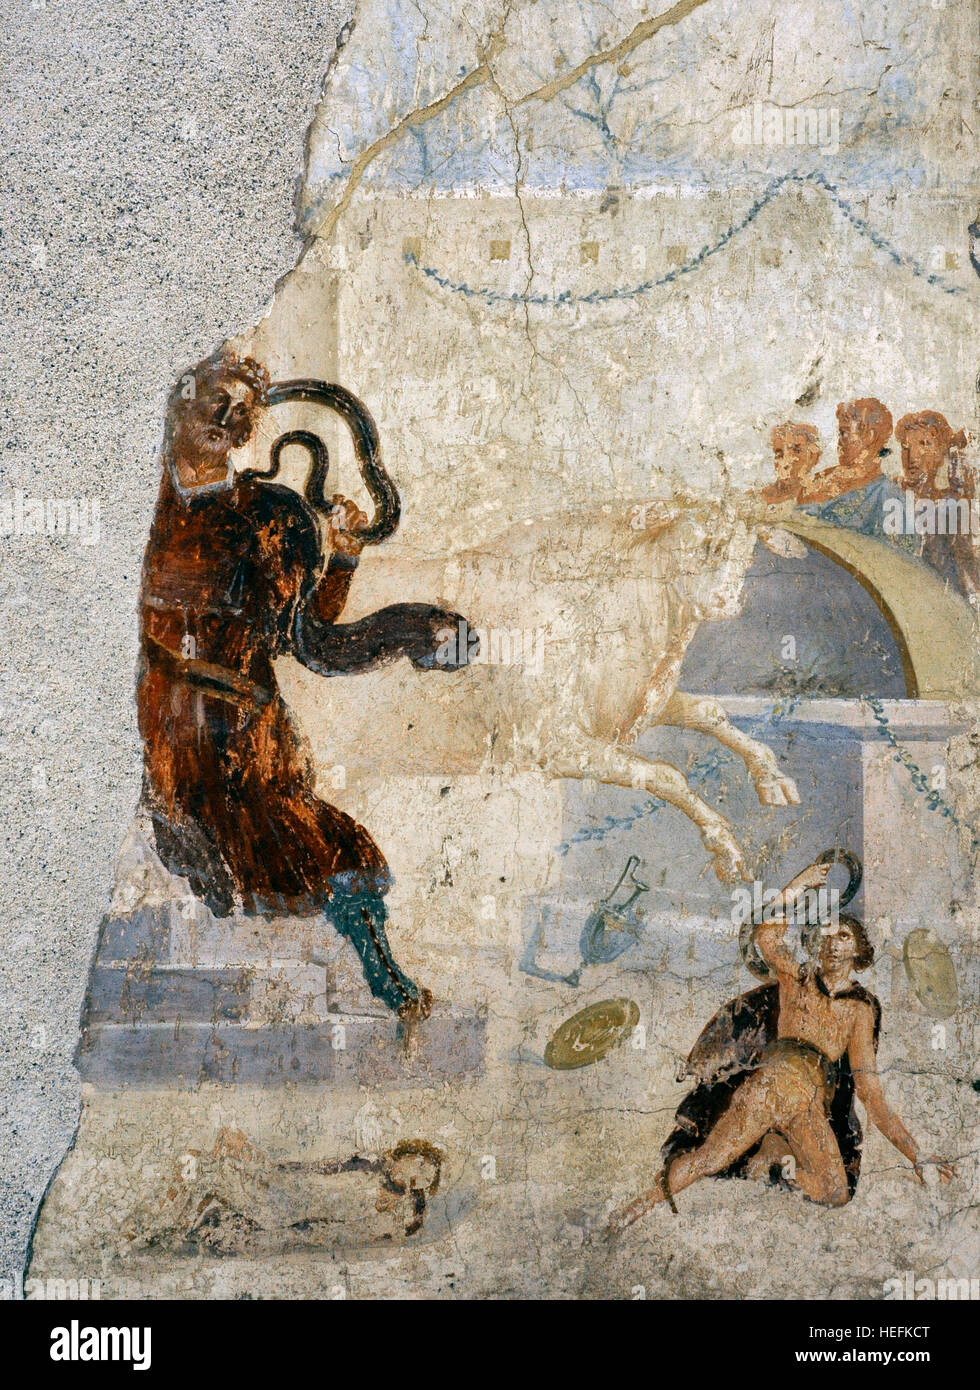 Death of Laocoon and his sons, attacked by serpents sent by the gods. House of Laocoon. Wall painting. Pompeii. National Archaeological Museum, Naples. Italy. Stock Photo